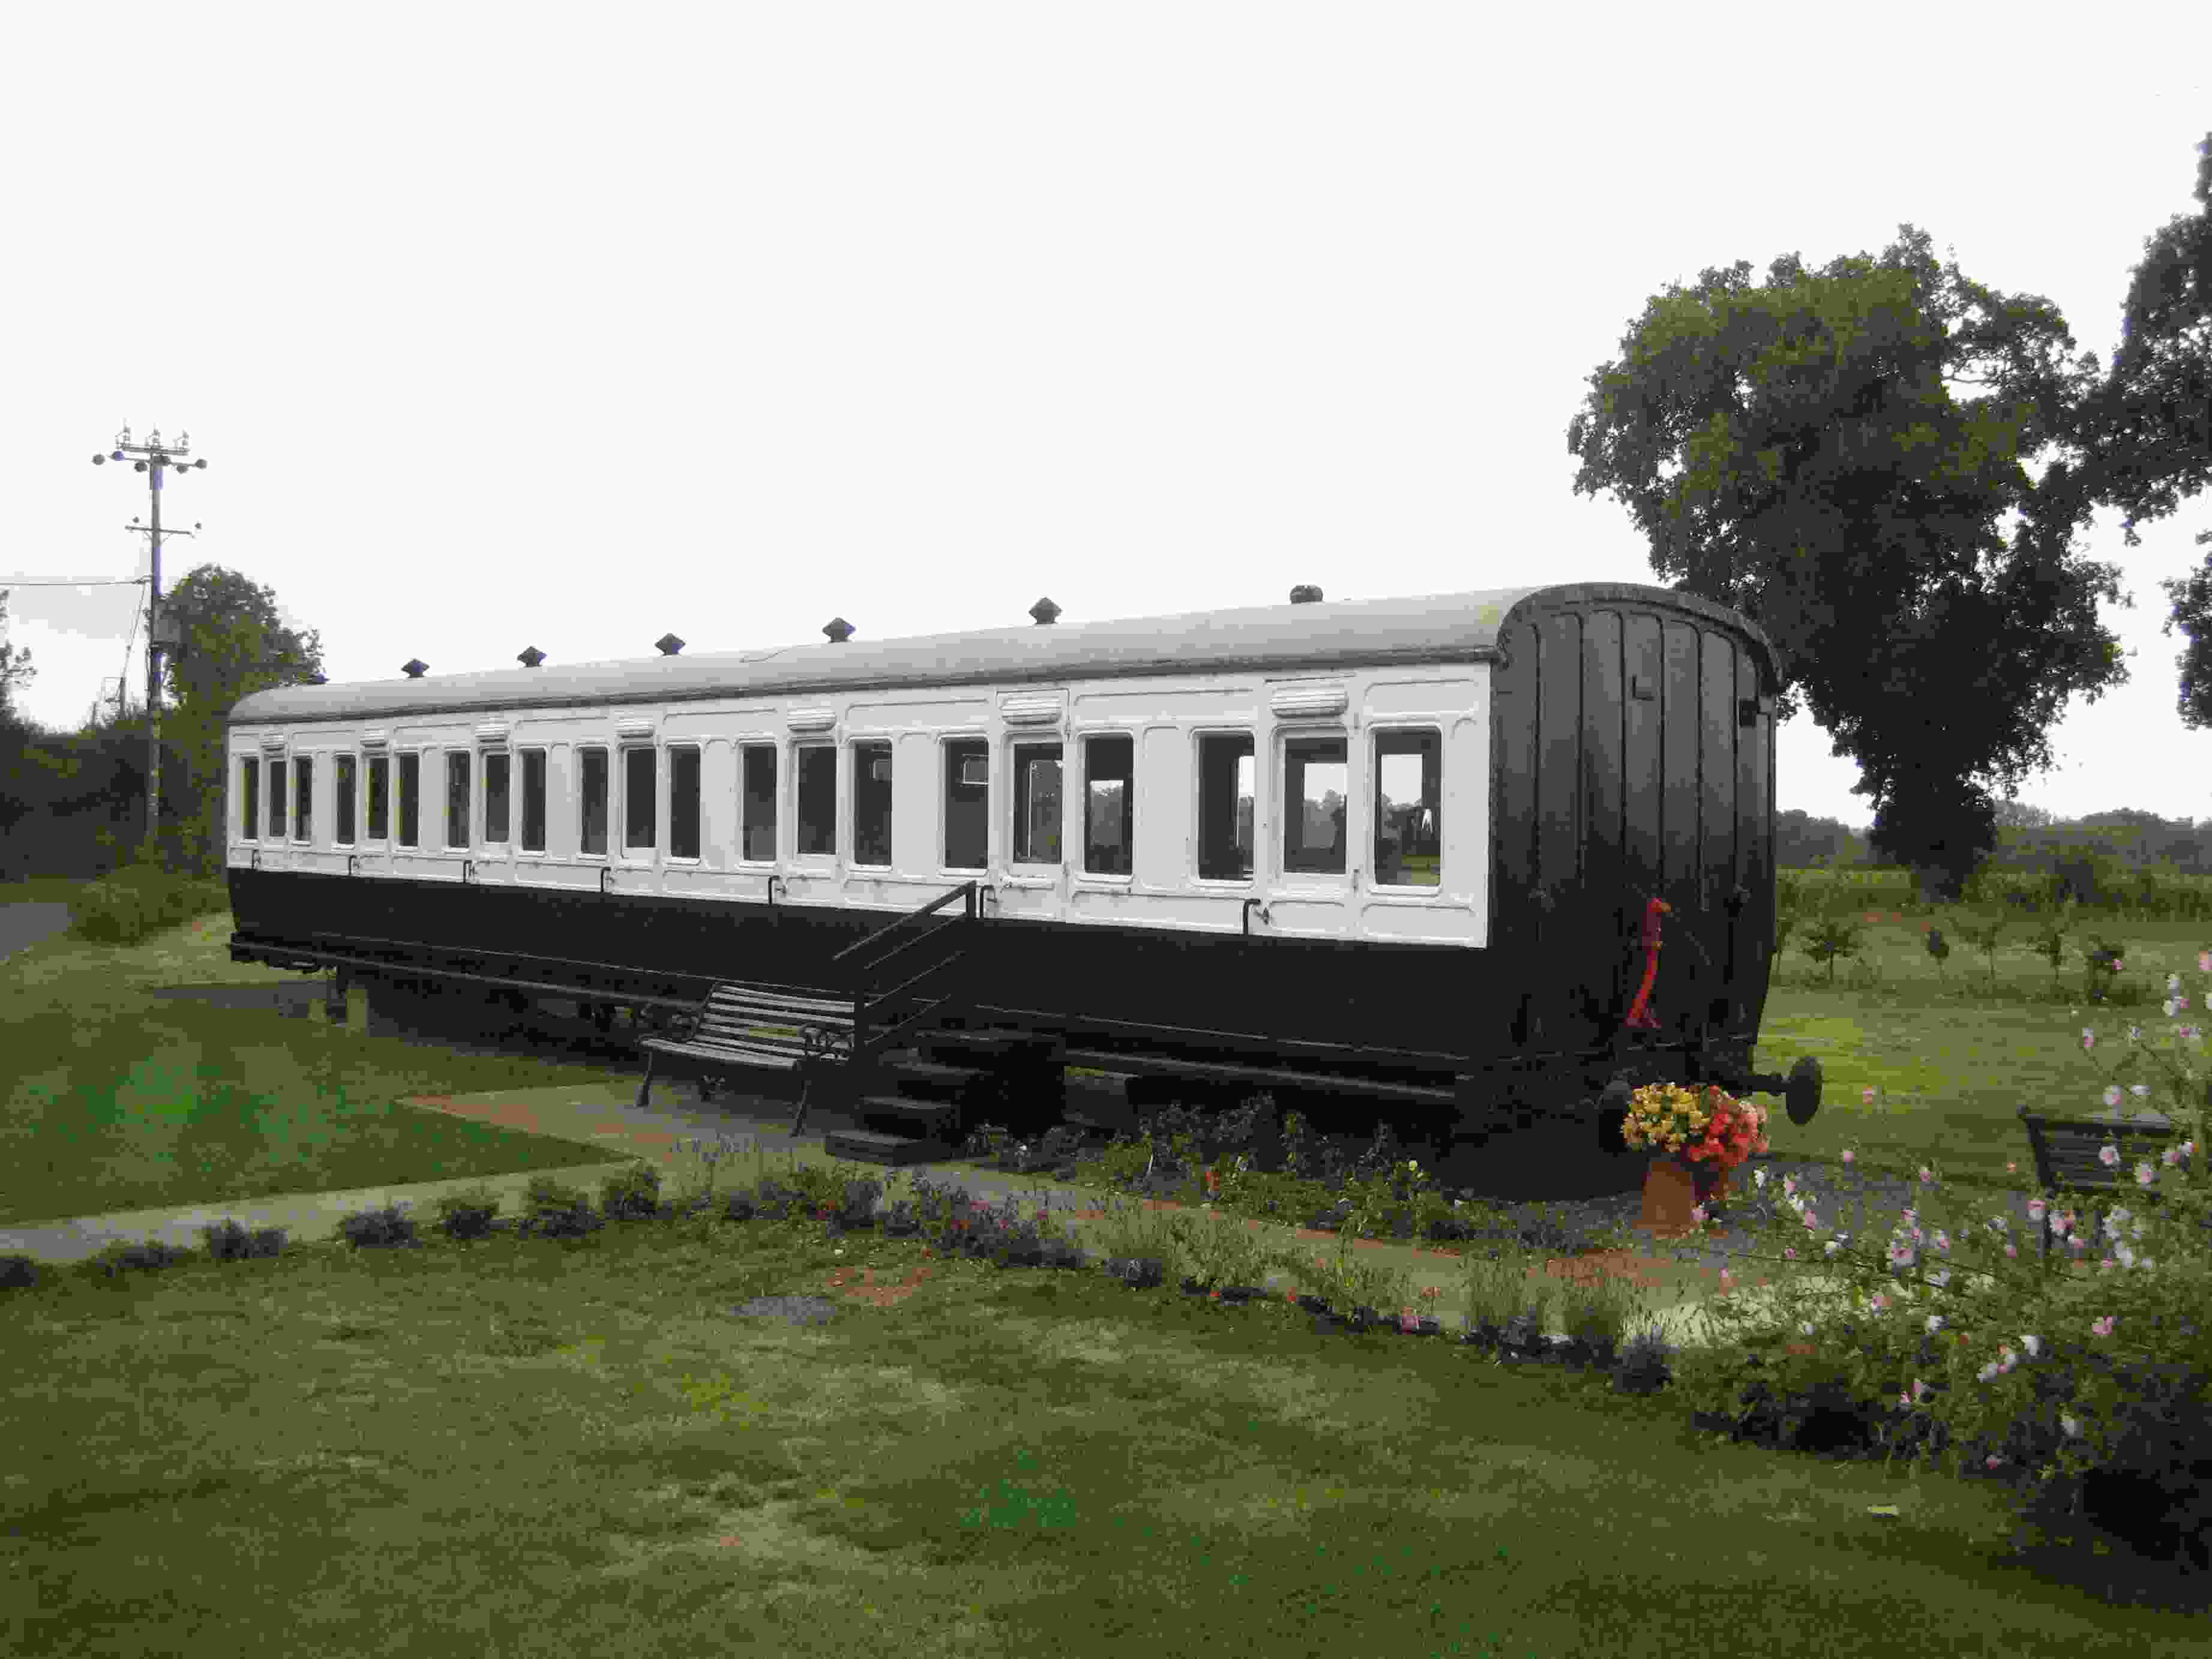 Greatest Train Carriage For Sale Learn more here!